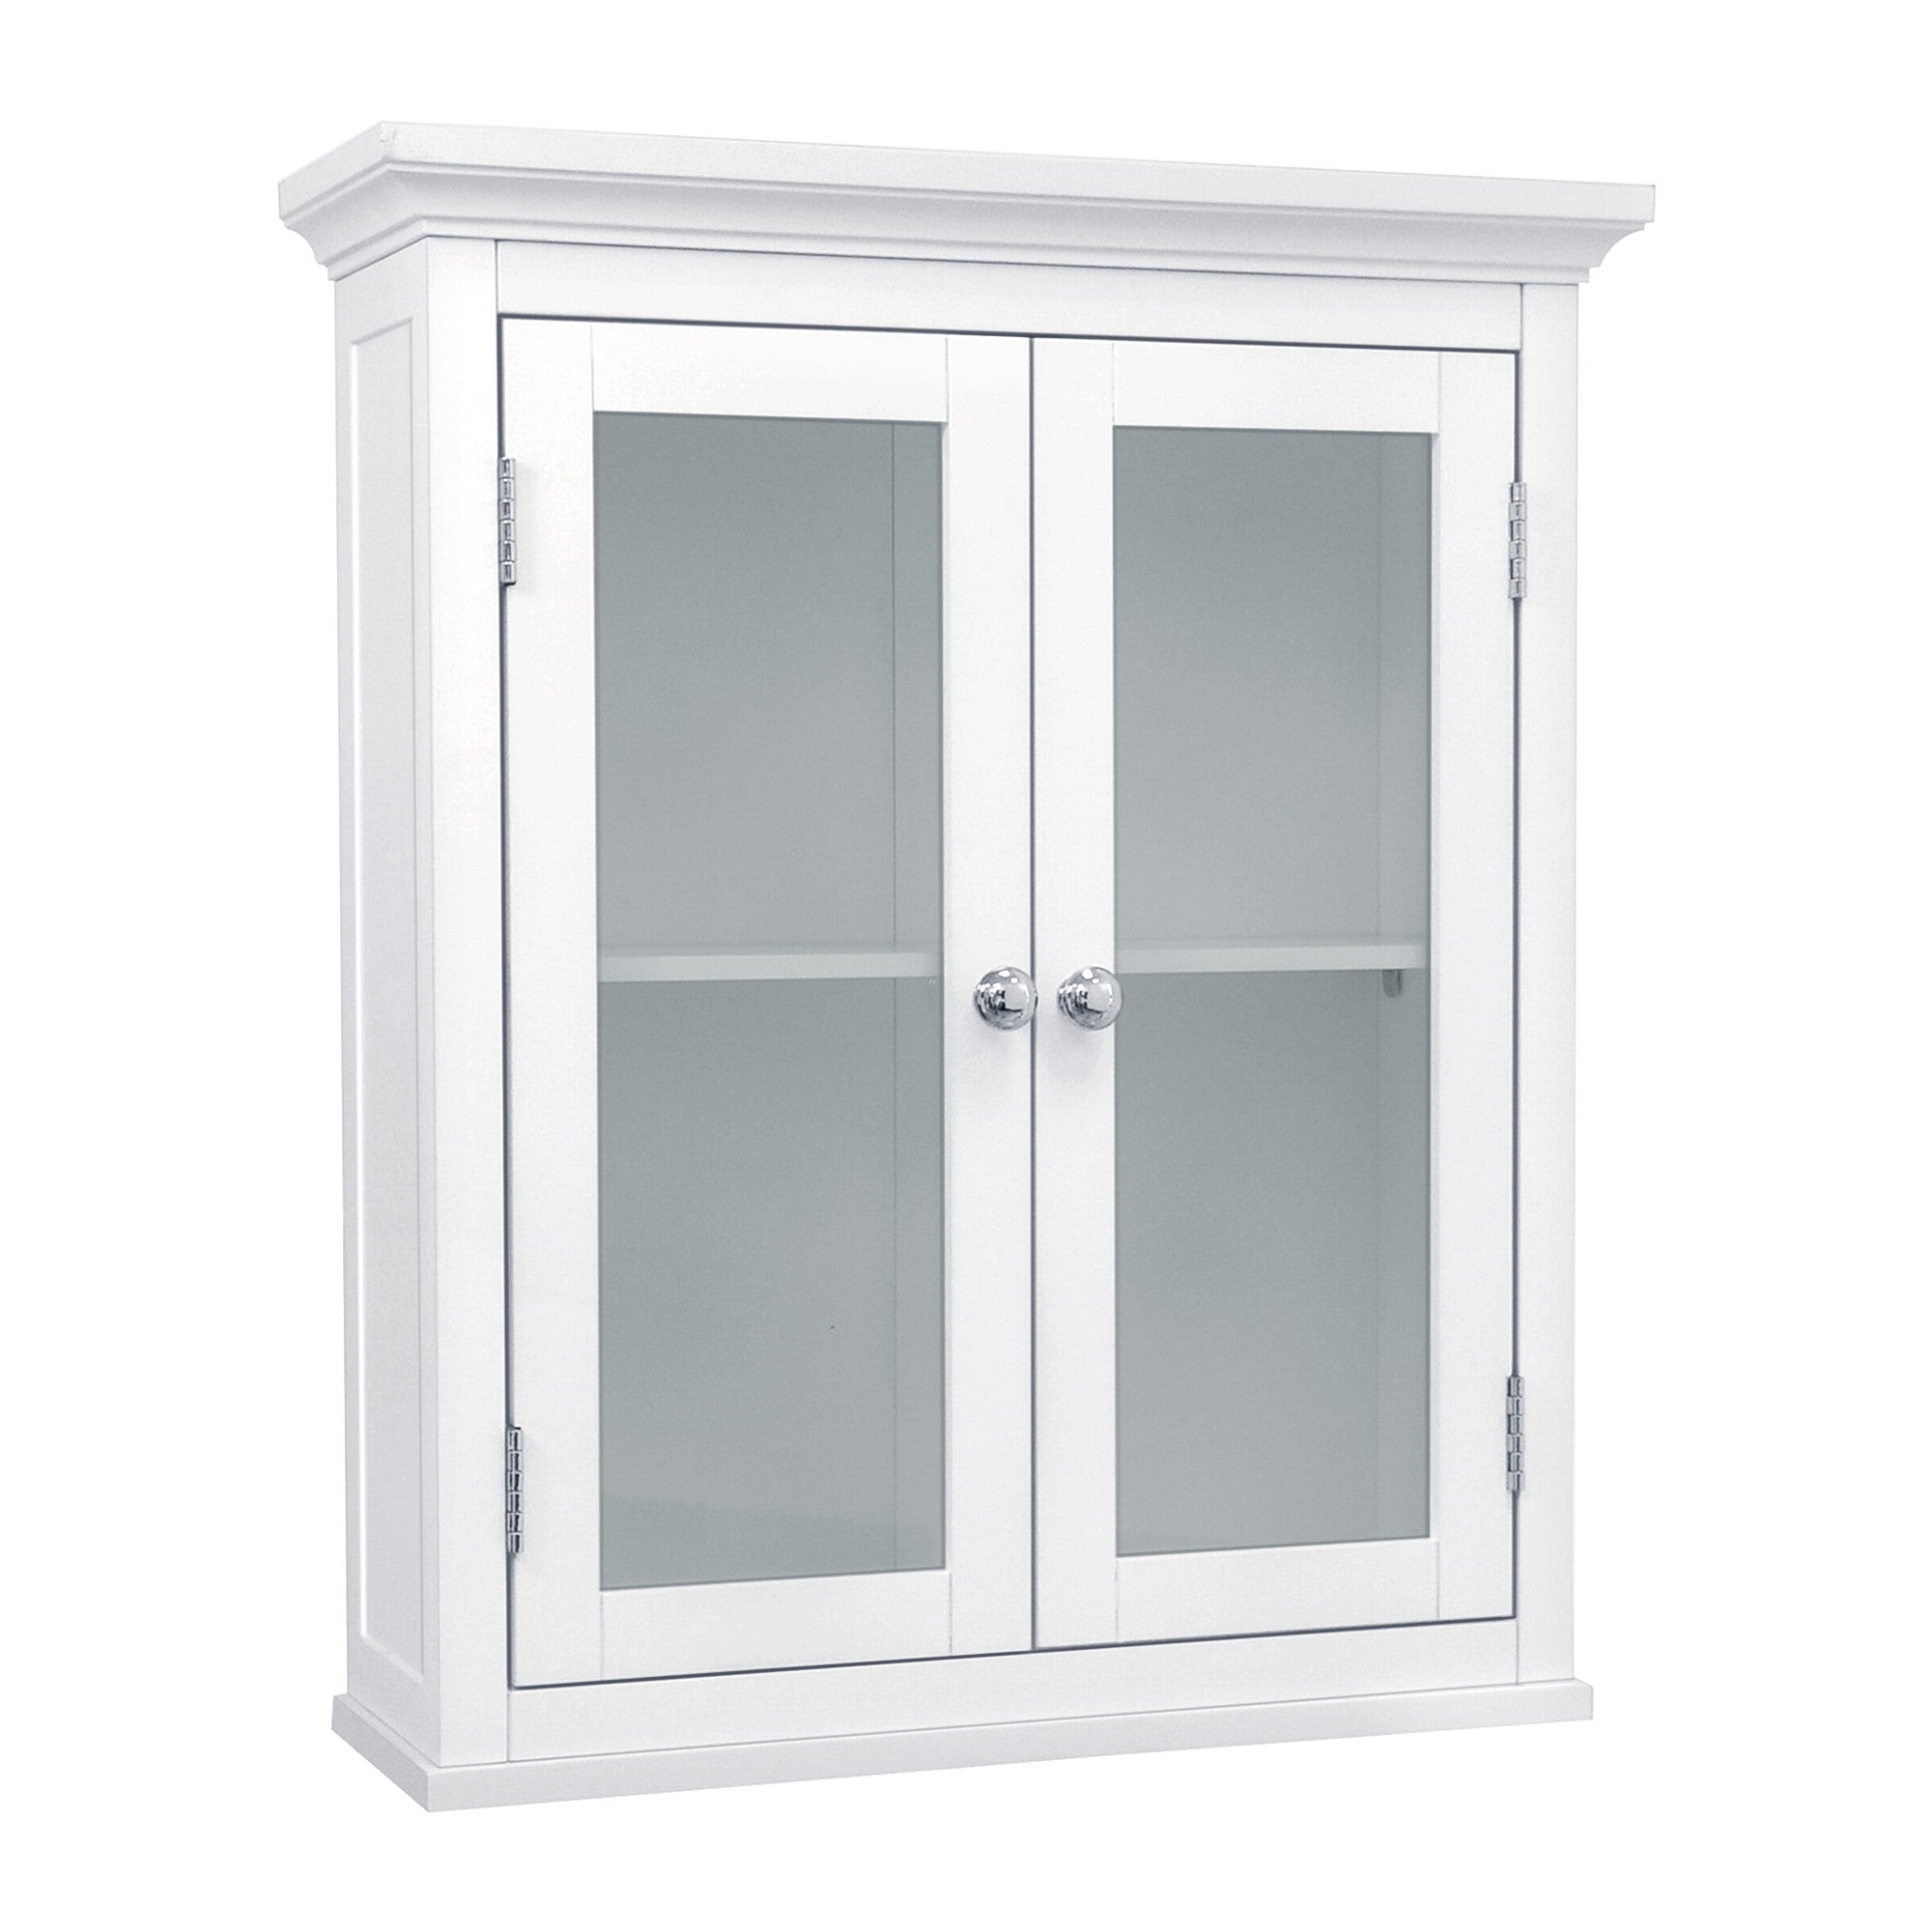 Elegant Home Fashions Madison Removable Wooden Wall Cabinet with 2 Doors- White